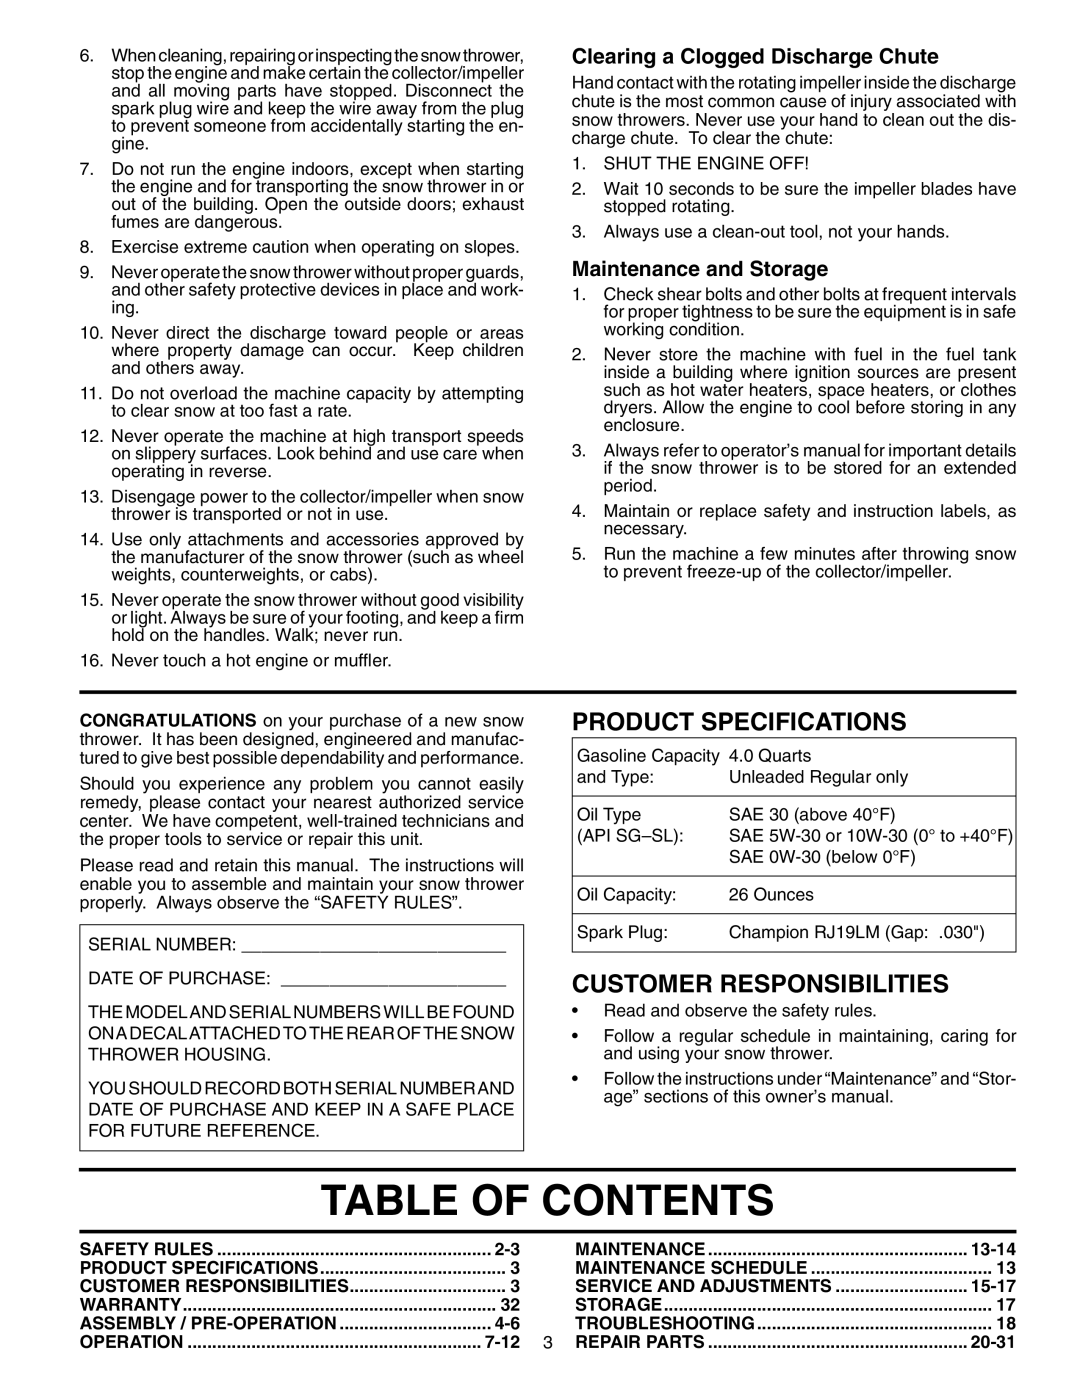 Husqvarna 924SBE Table Of Contents, Product Specifications, Customer Responsibilities, Clearing a Clogged Discharge Chute 